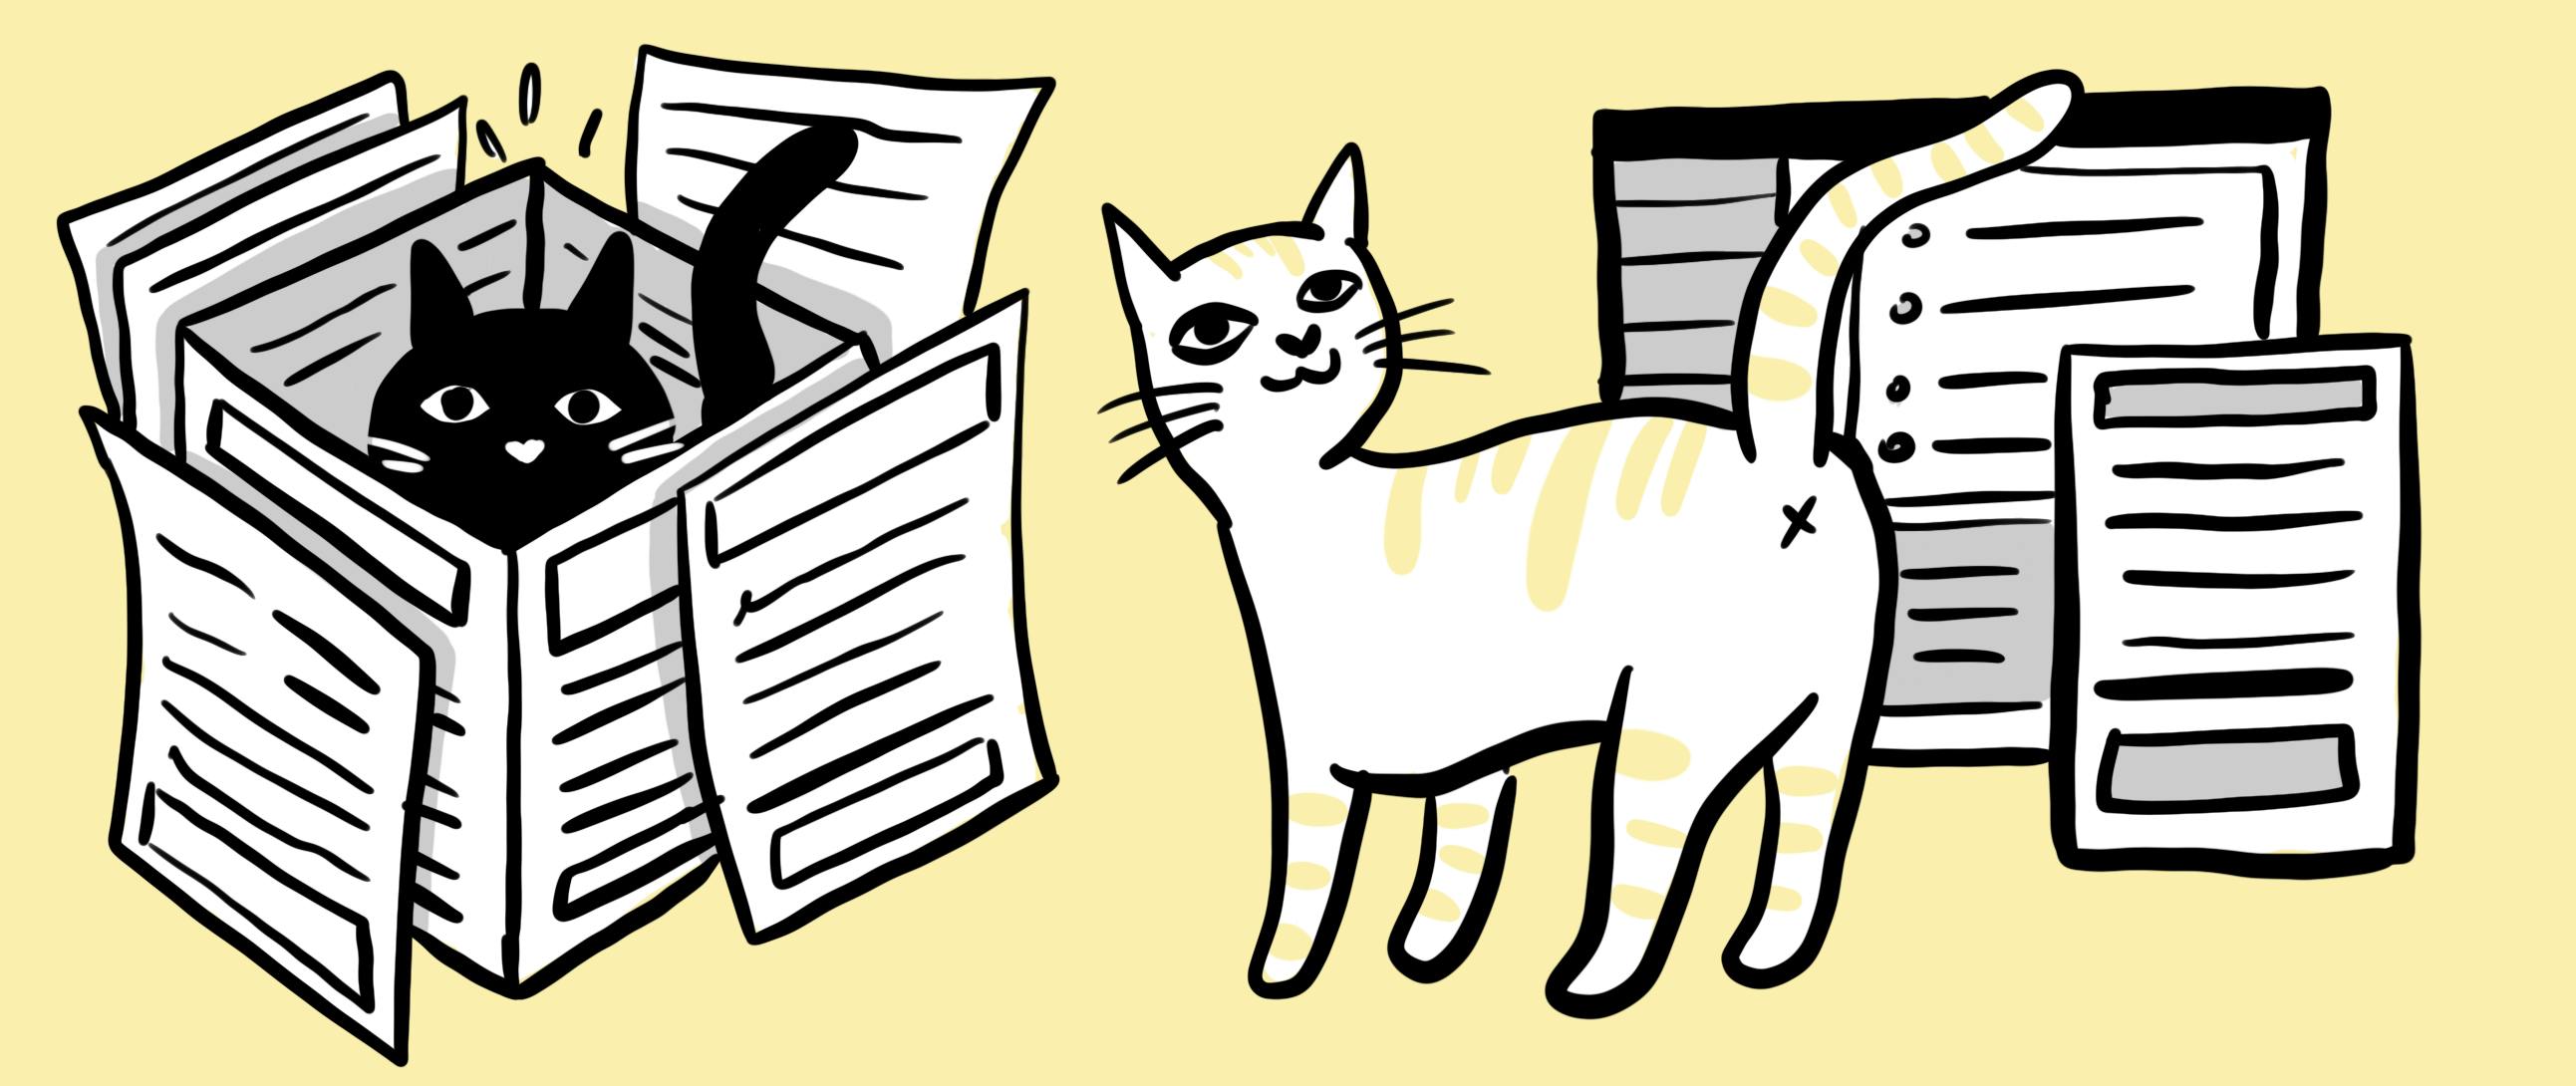 E-invoices and cats